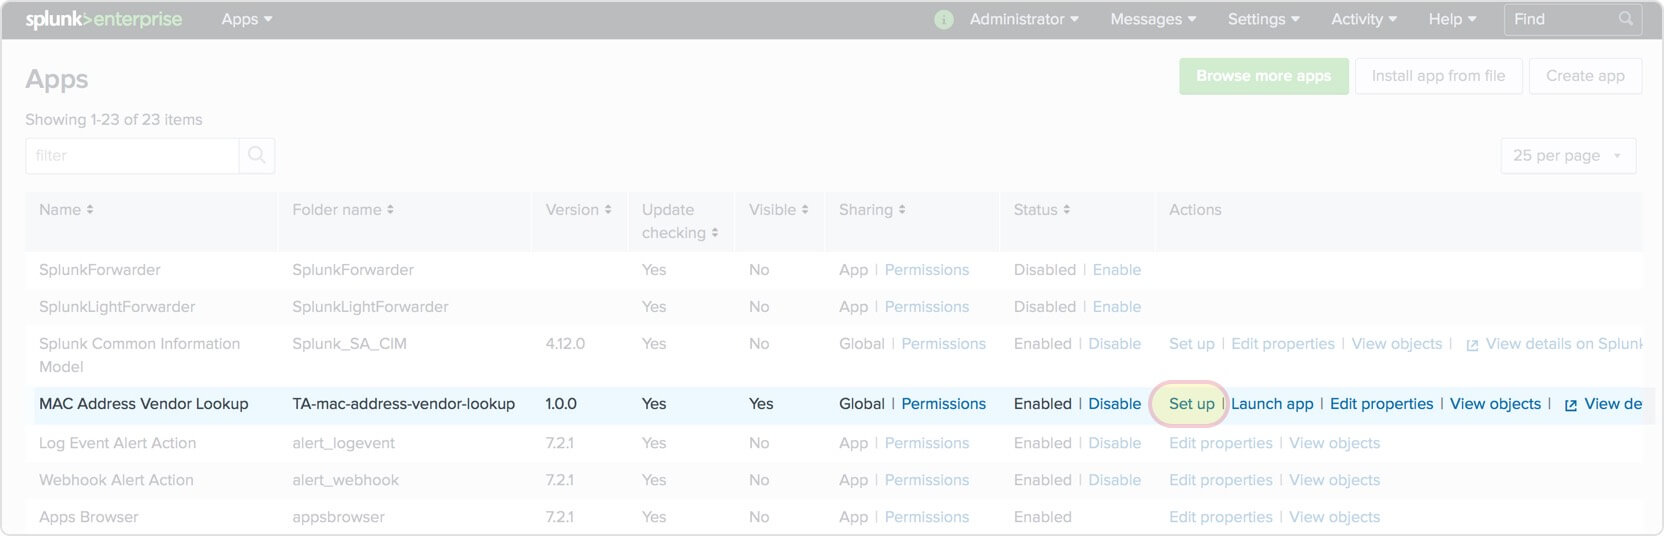 You can configure the application on the Apps page.